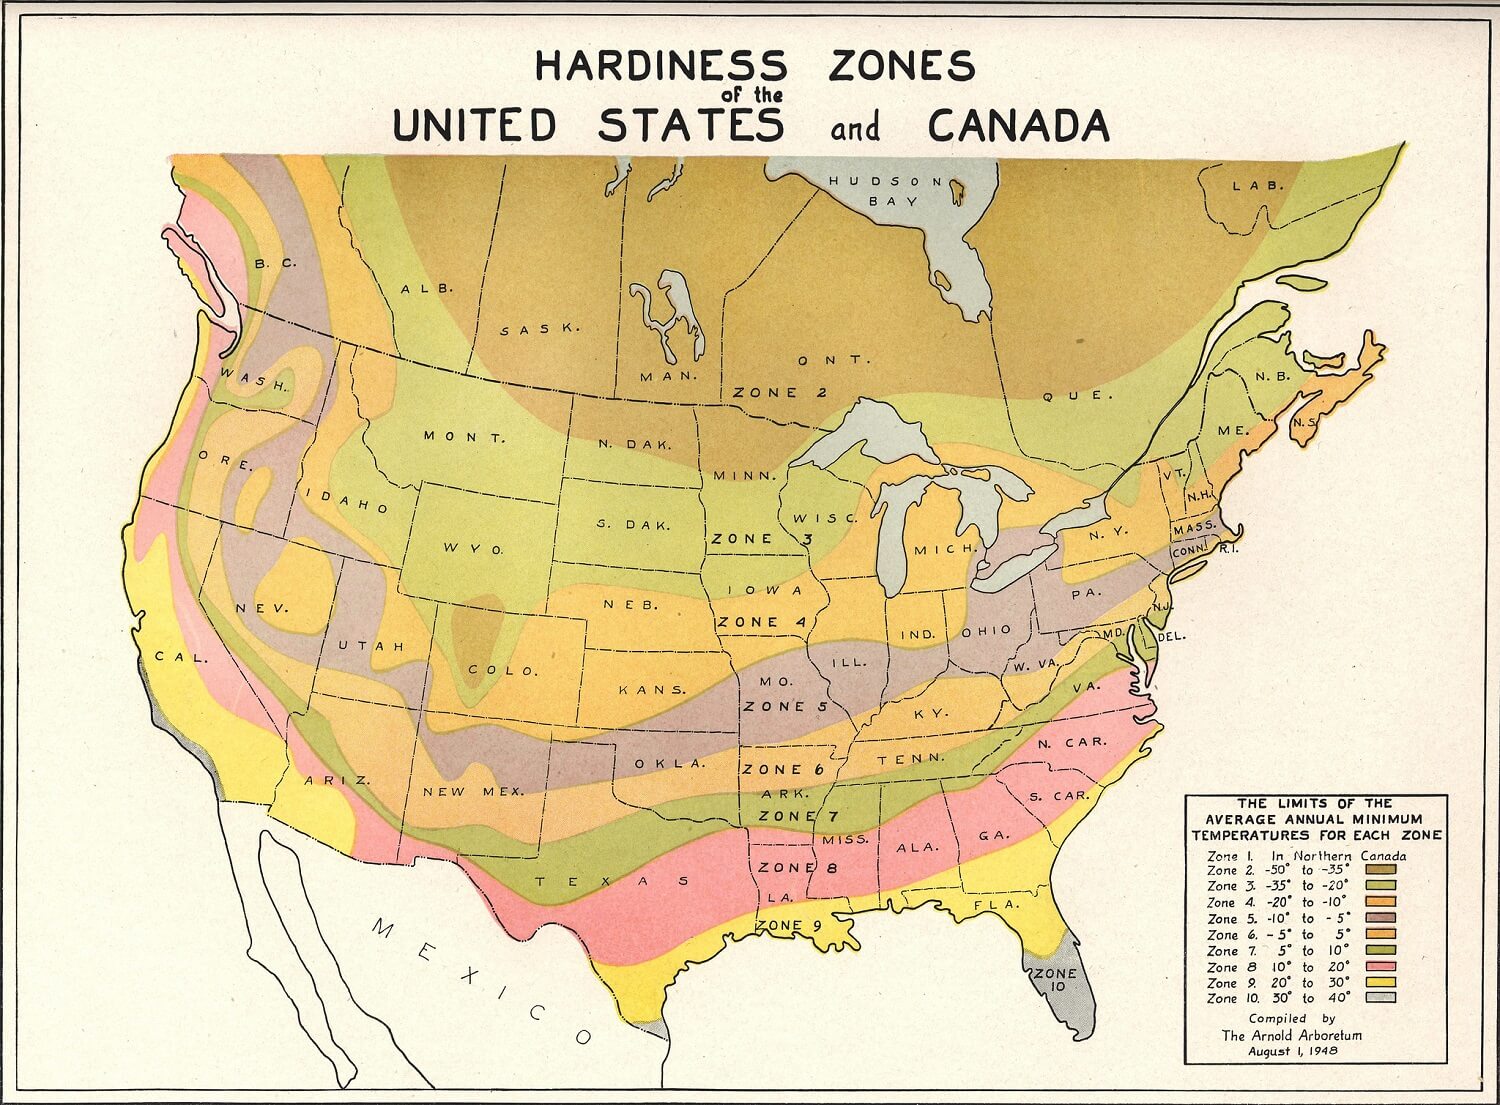 What Is The USDAs Plant Hardiness Zone Map 